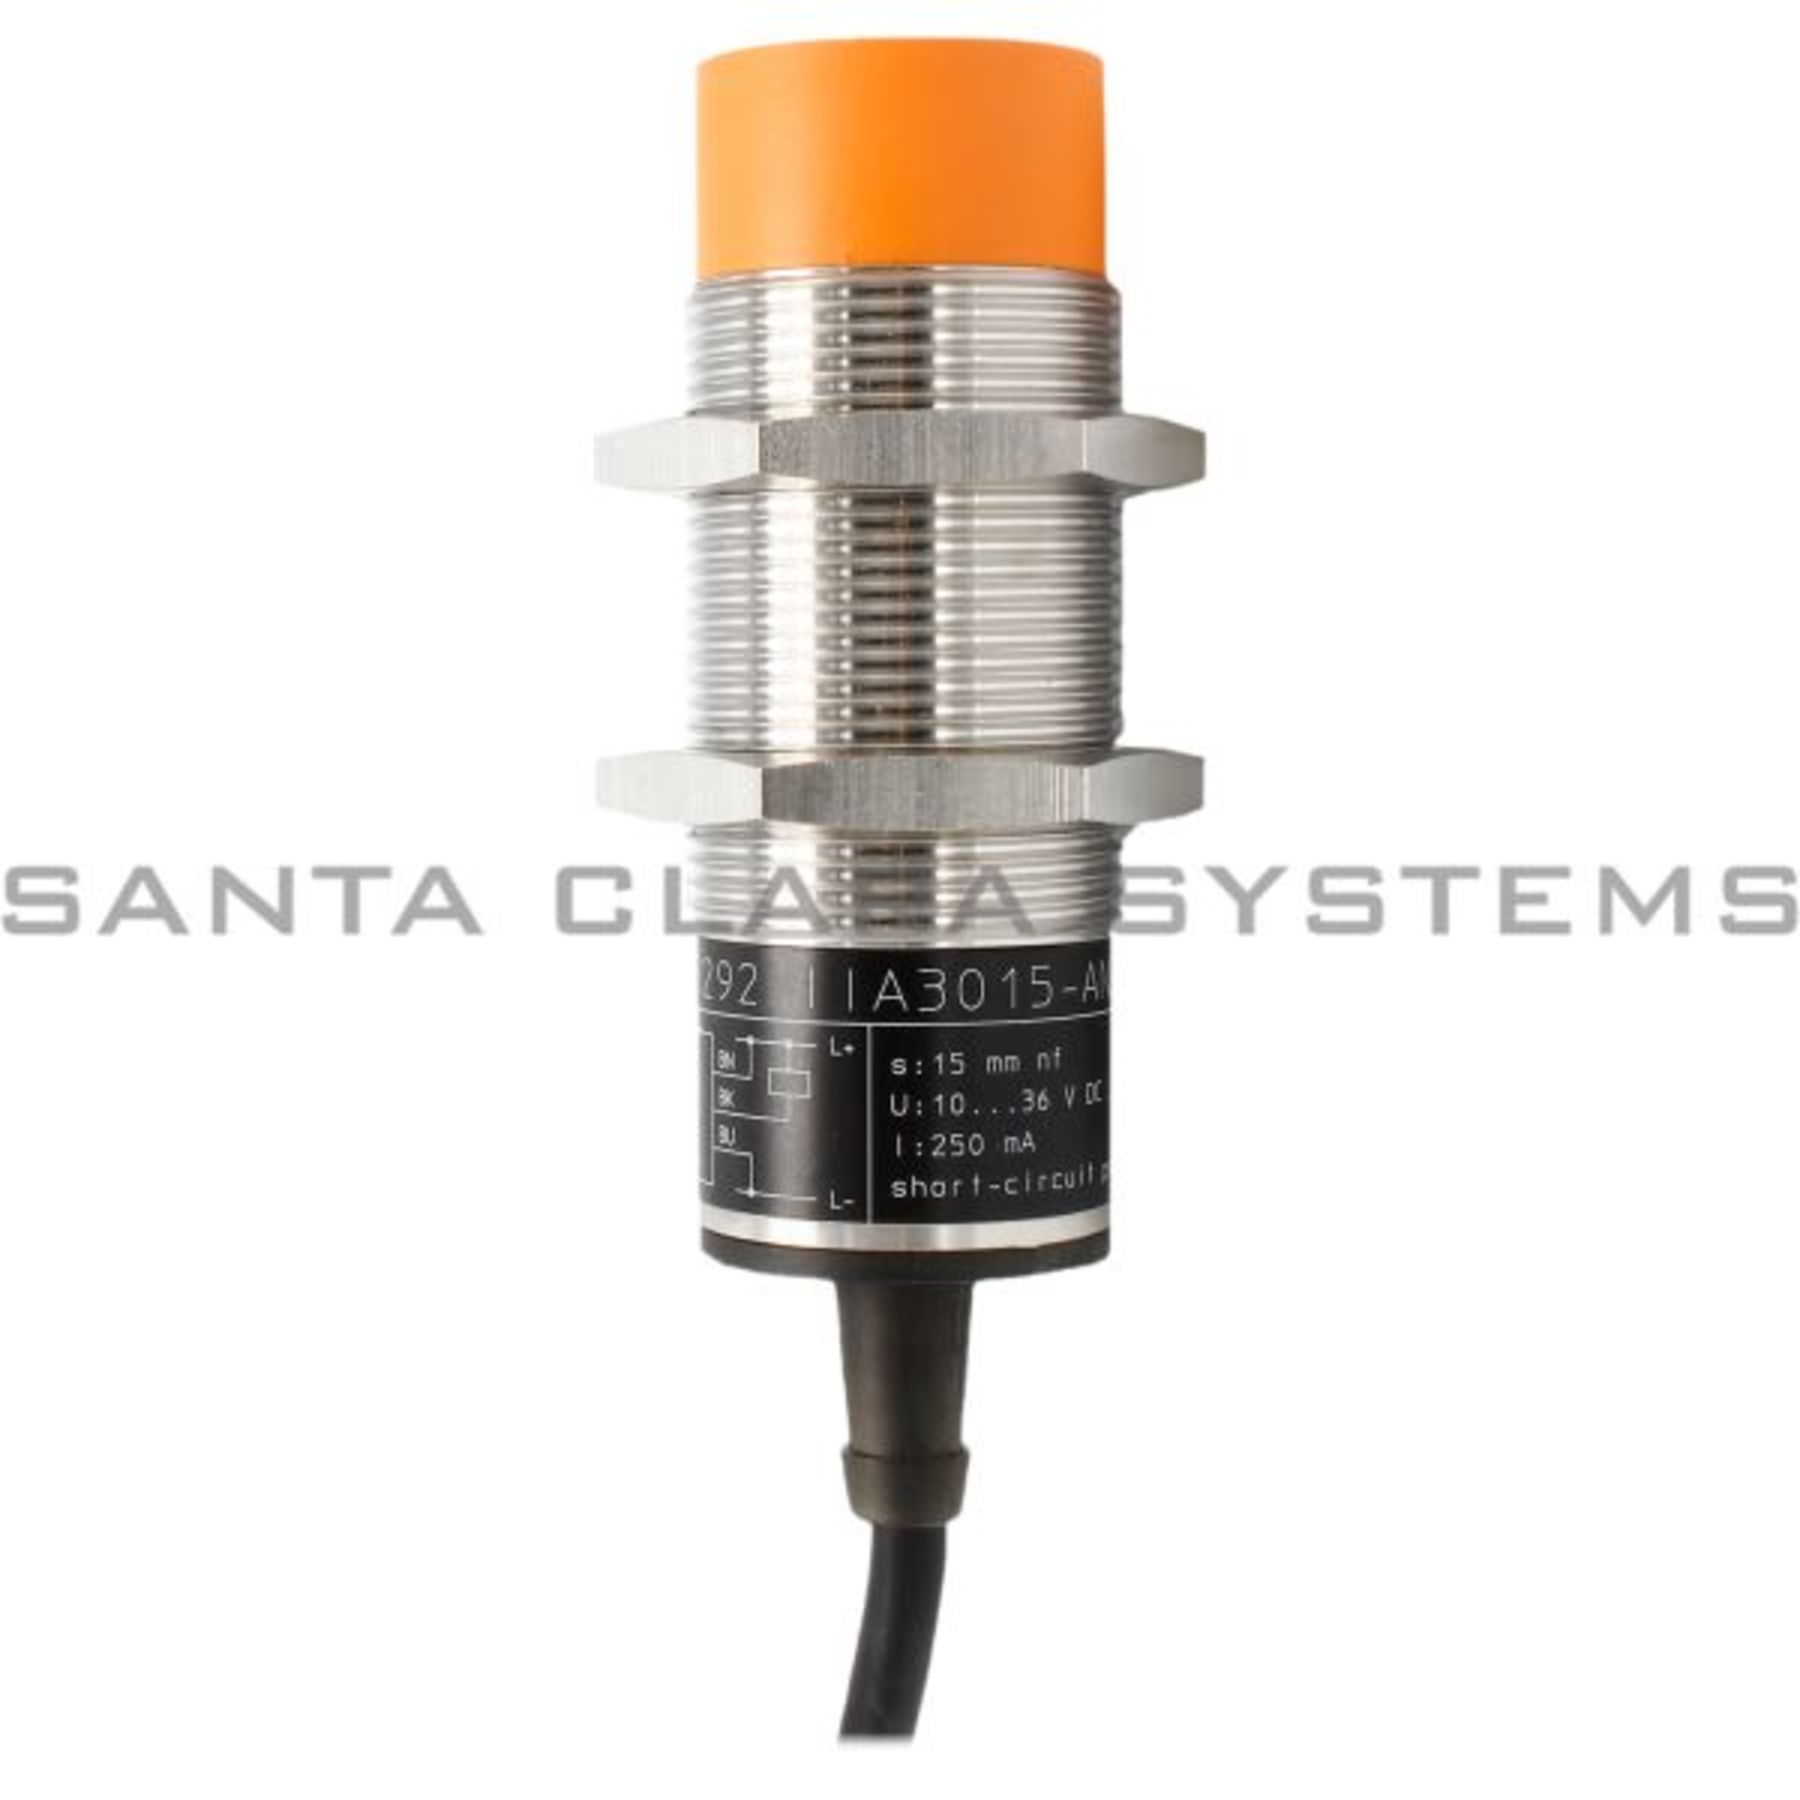 II5292 Efector In stock and ready to ship - Santa Clara Systems